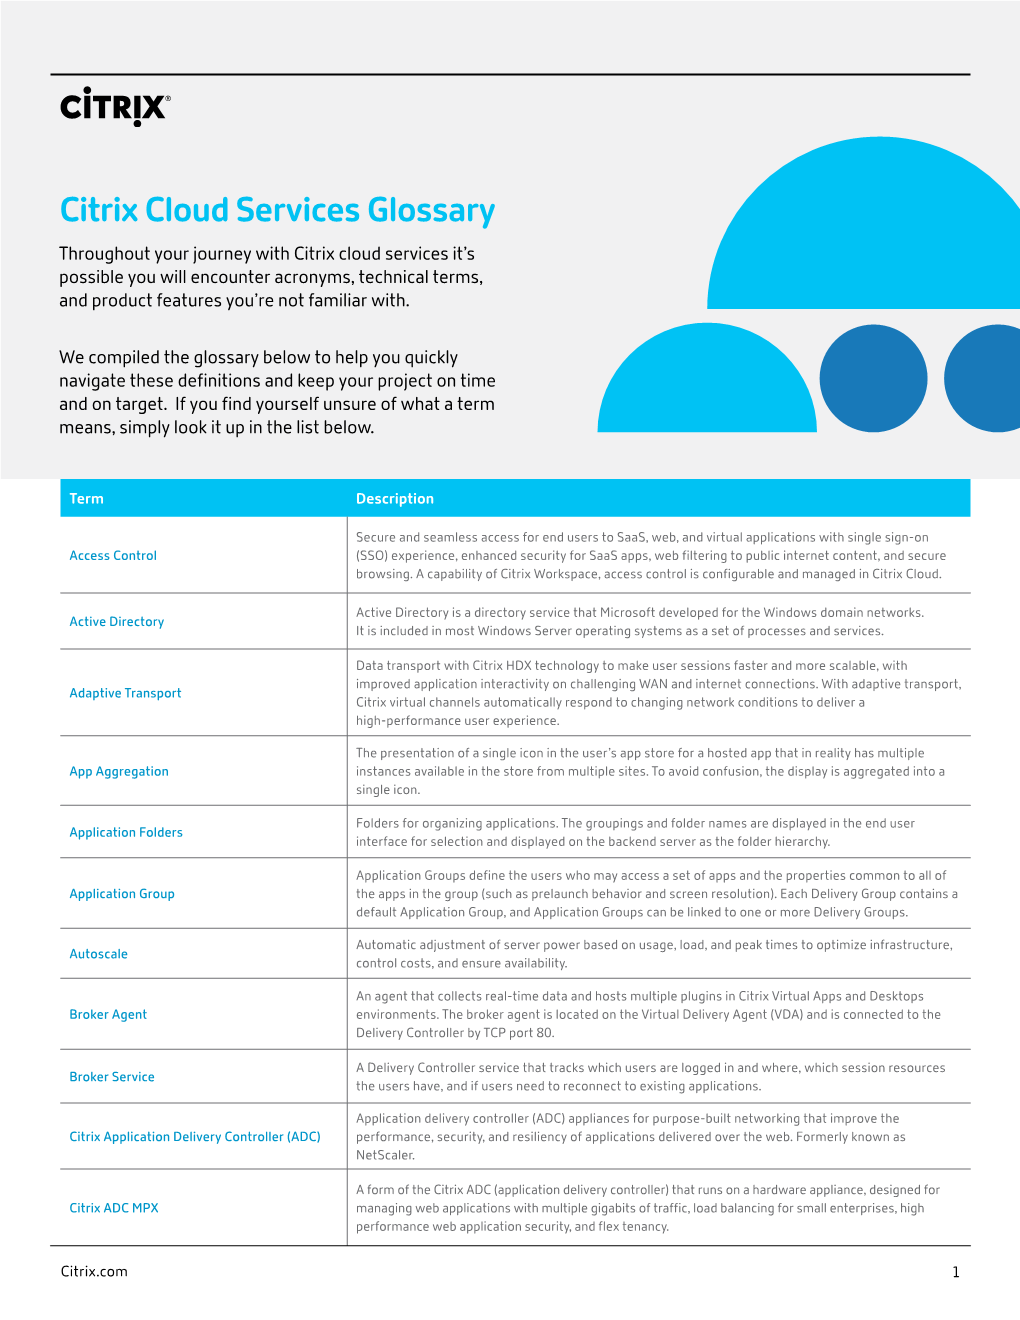 Citrix Cloud Services Glossary